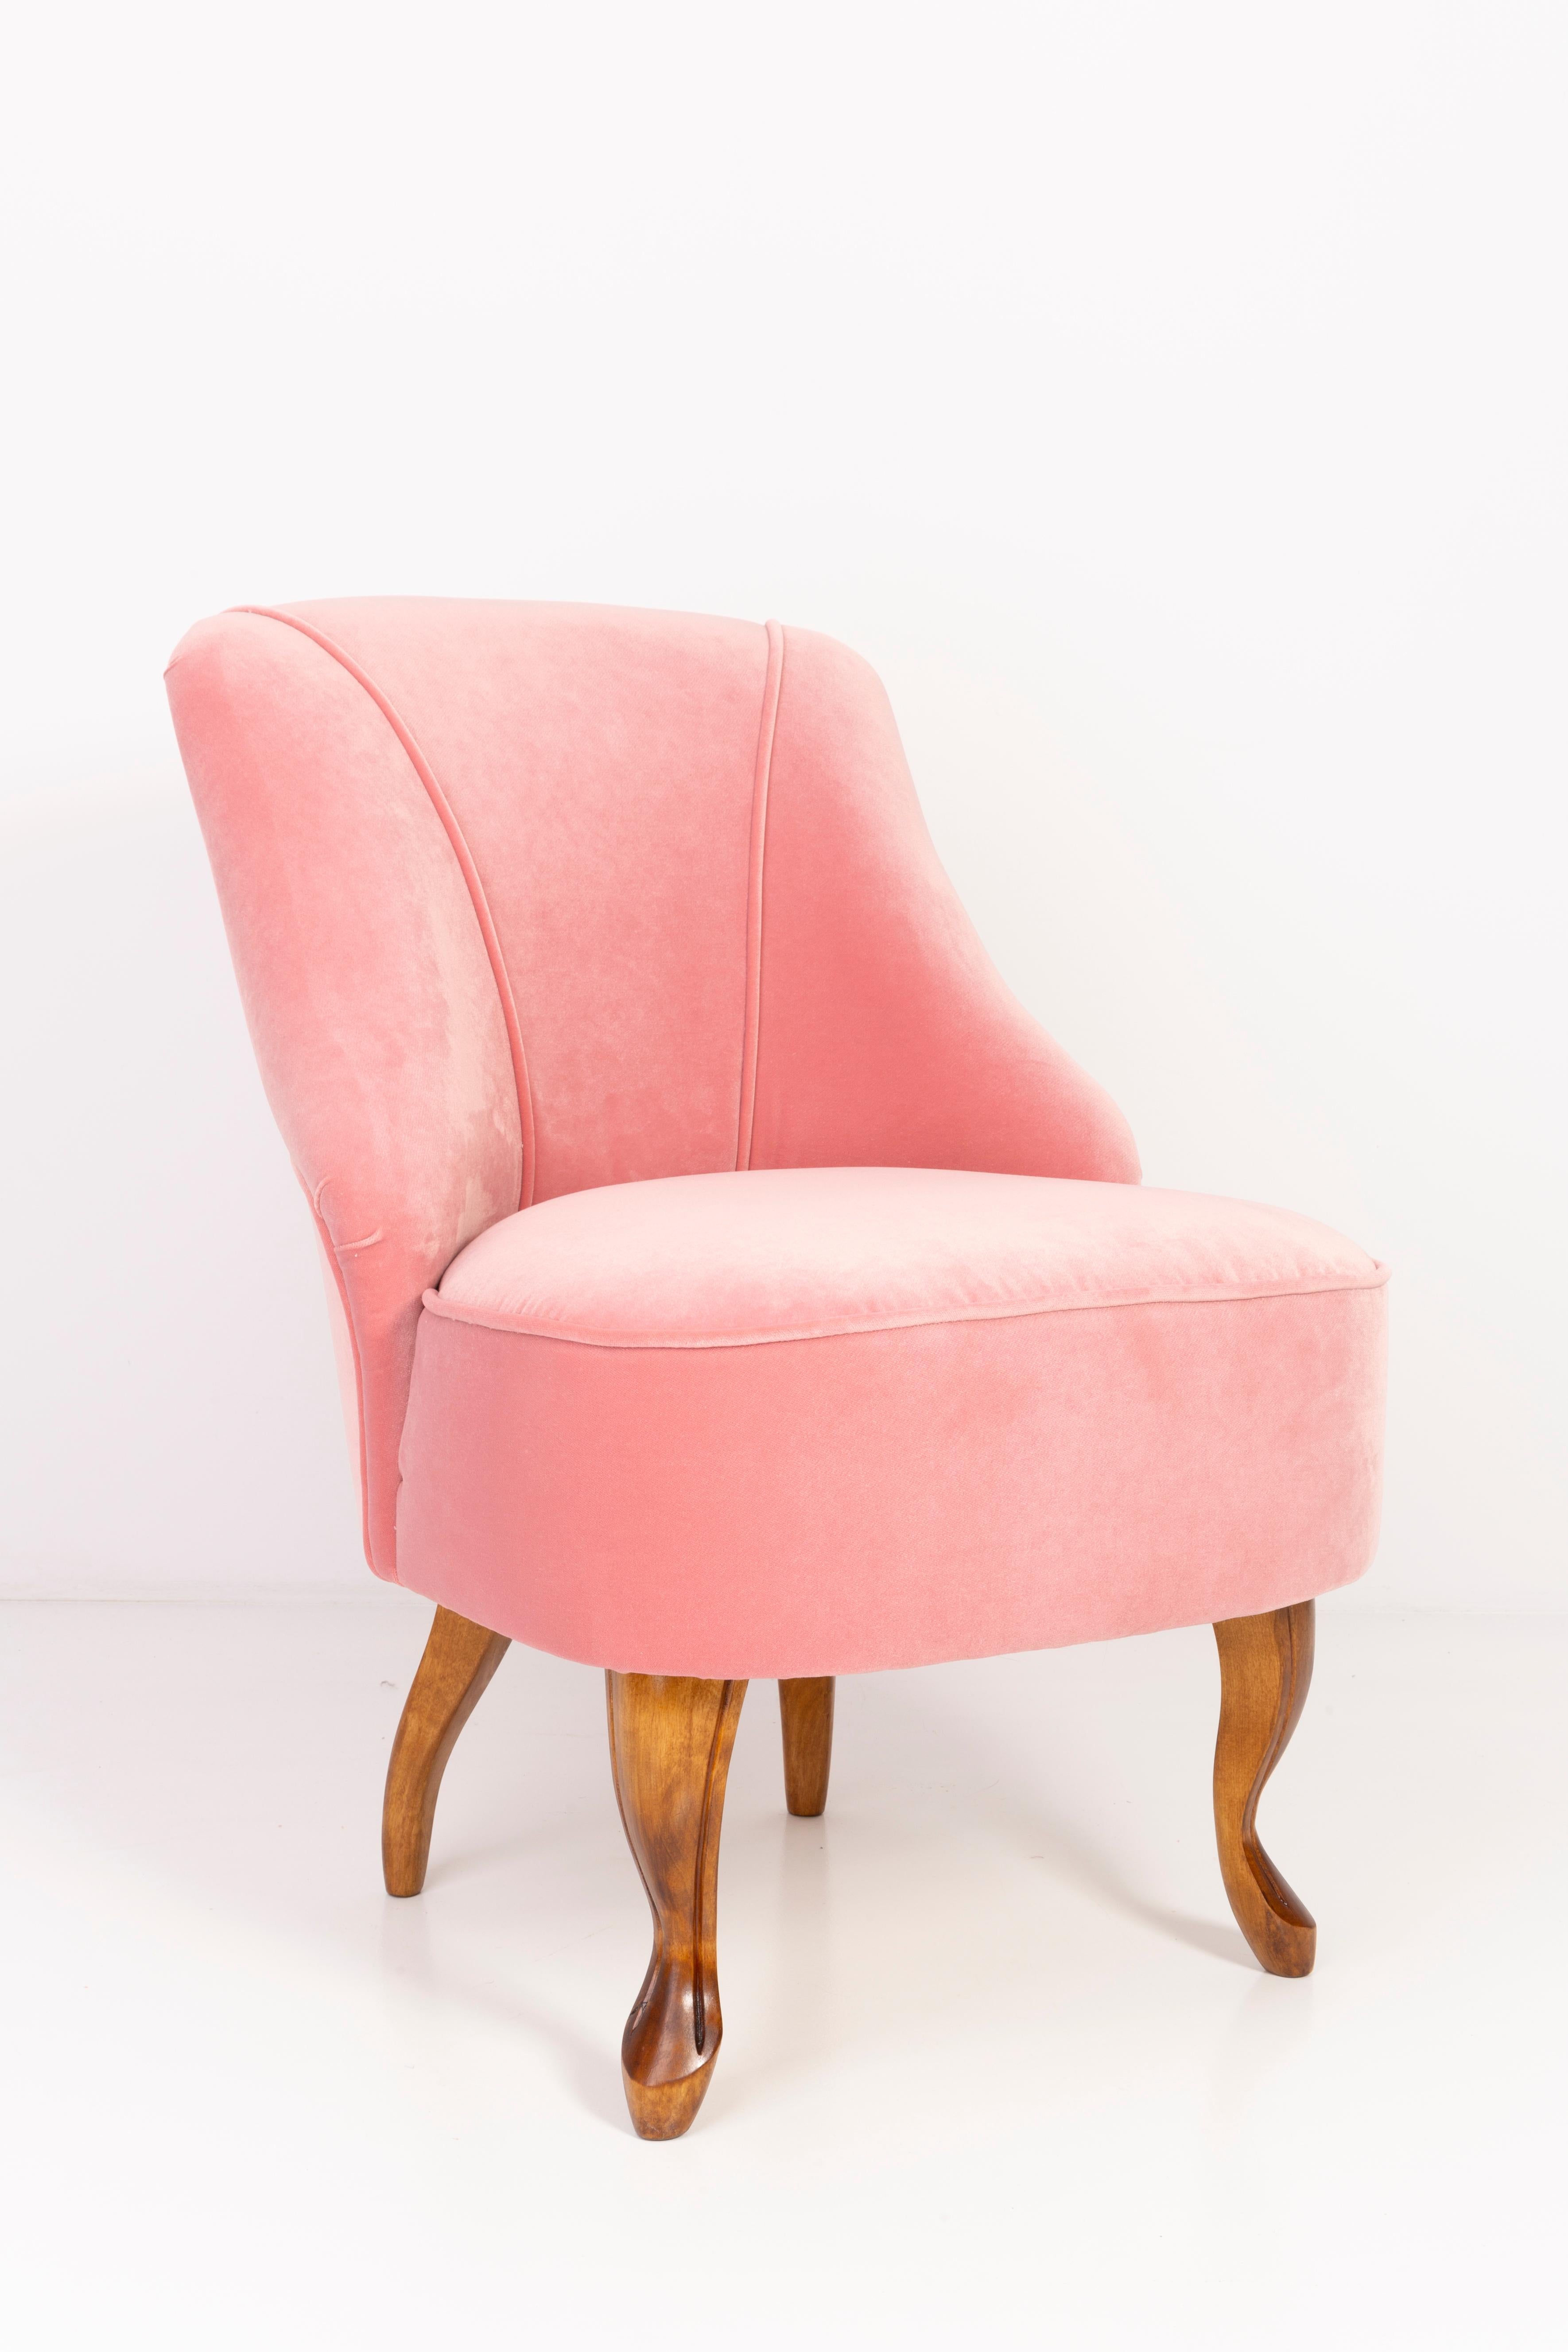 Hand-Crafted Set of Four 20th Century Art Deco Baby Pink Armchairs, 1950s For Sale